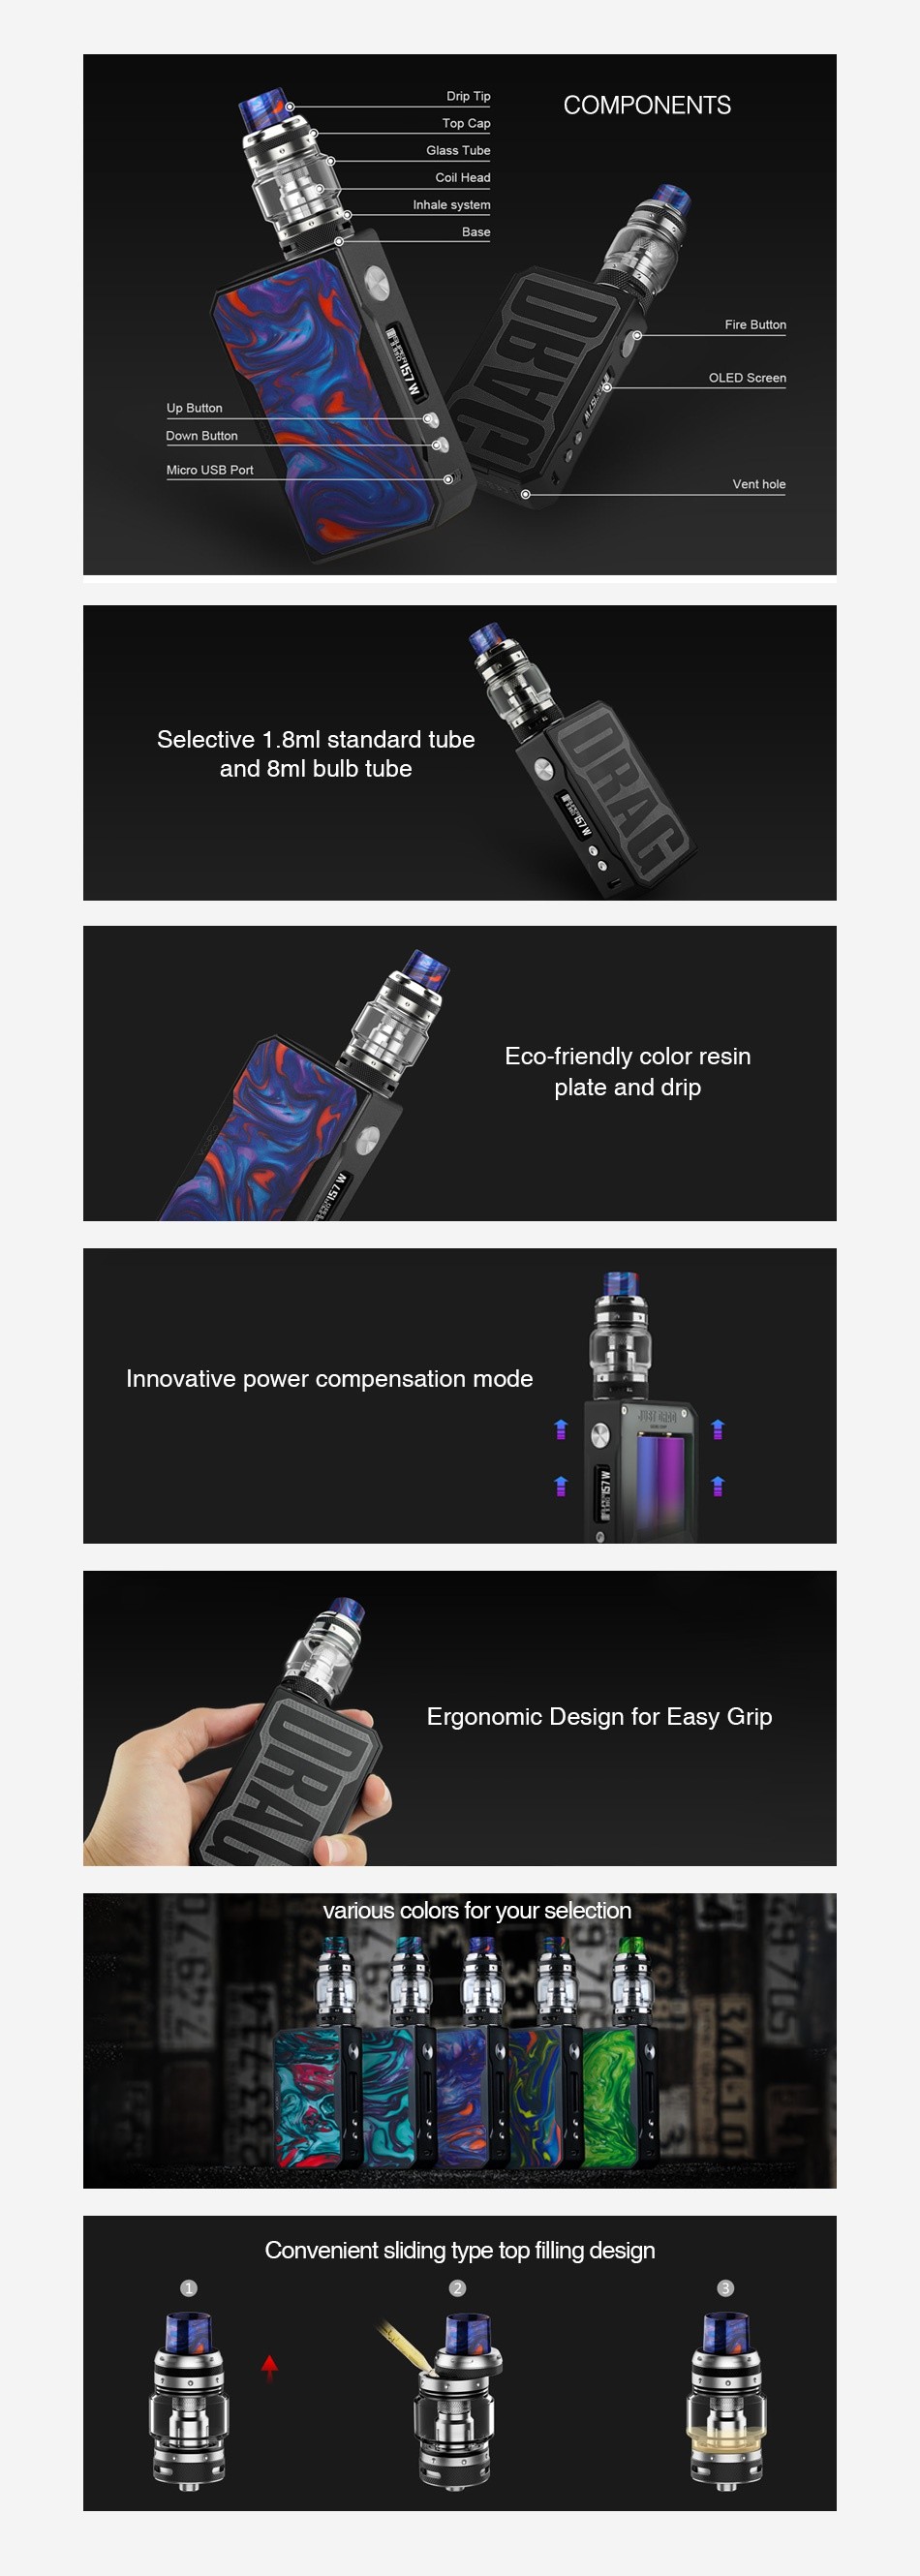 VOOPOO Black Drag 157W TC Kit with UFORCE T1 Inhale system LED Screen Up Button Micro UsB Port Vent hole elective 1  8ml standard tube and 8ml bulb tube Eco friendly color resin plate and drip Innovative power compensation mode Ergonomic Design for Easy Grip arious colors for your selection  Convenient sliding type top filling design